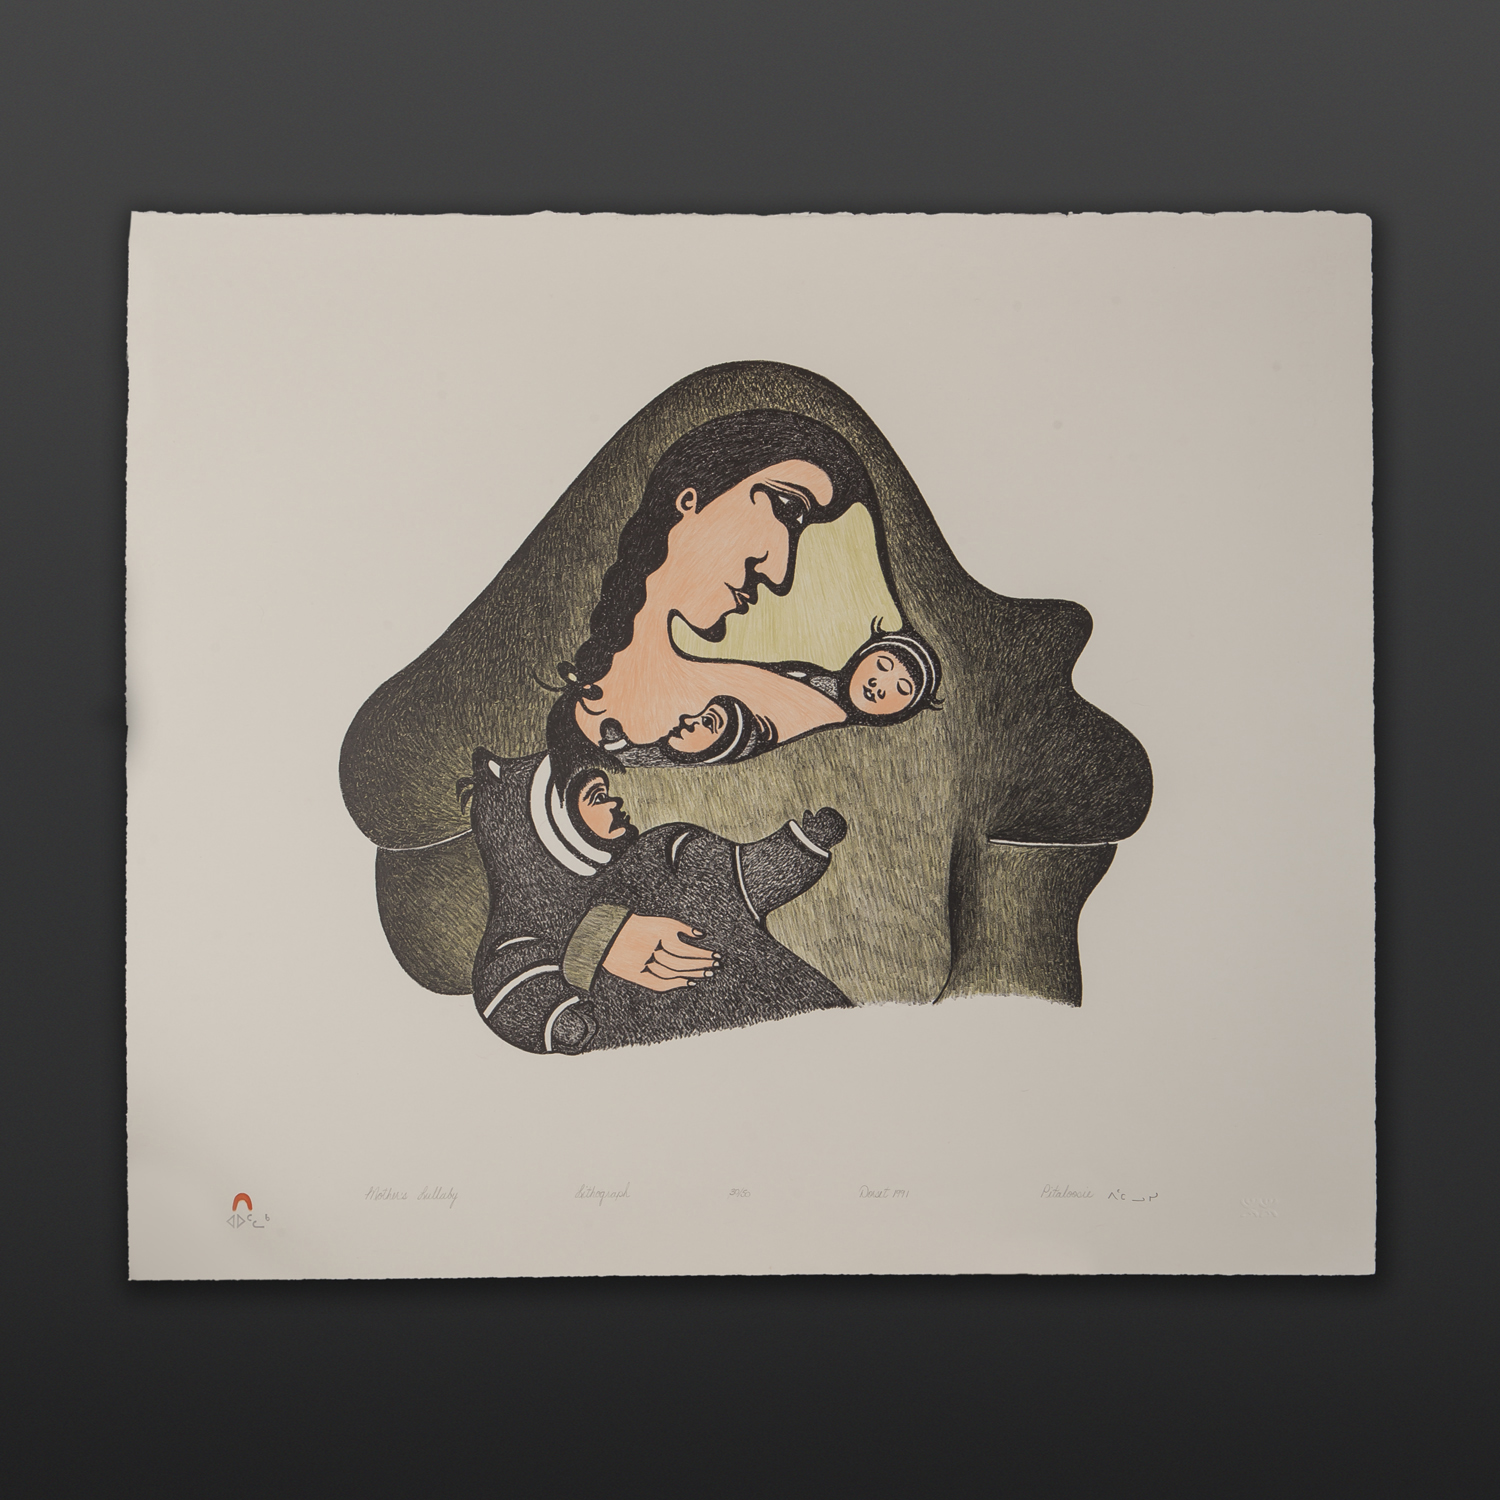 Mother's Lullaby Pitaloosie Inuit Lithograph 26" x 22" $500